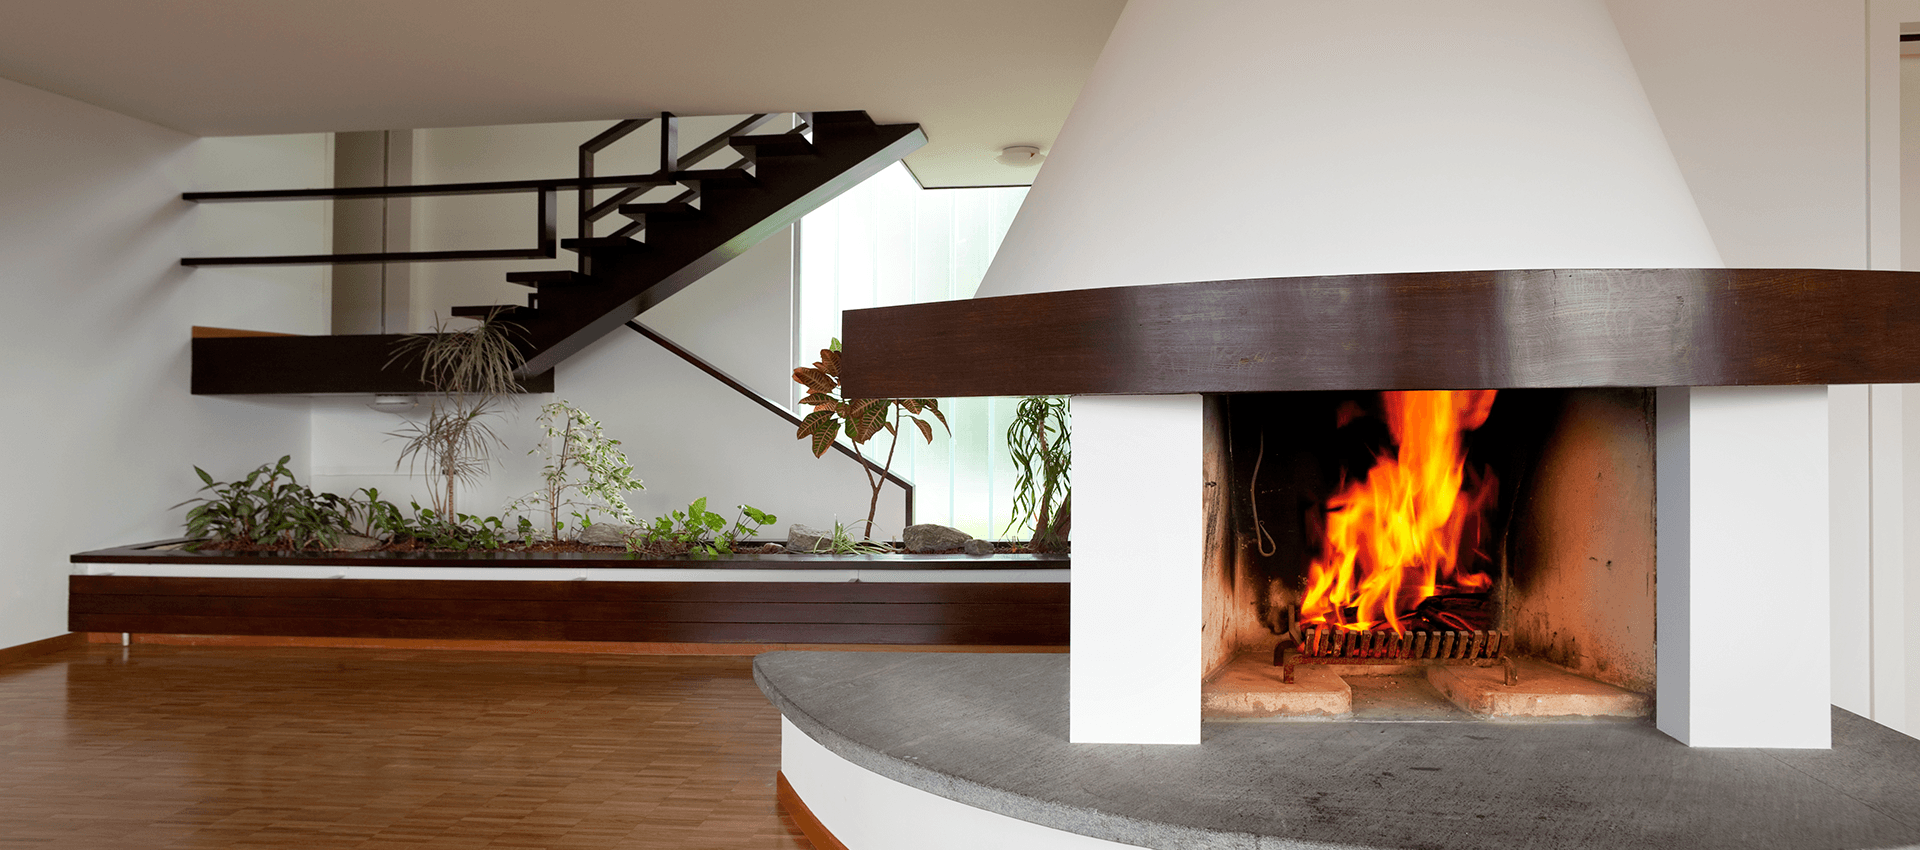 traditional fireplace